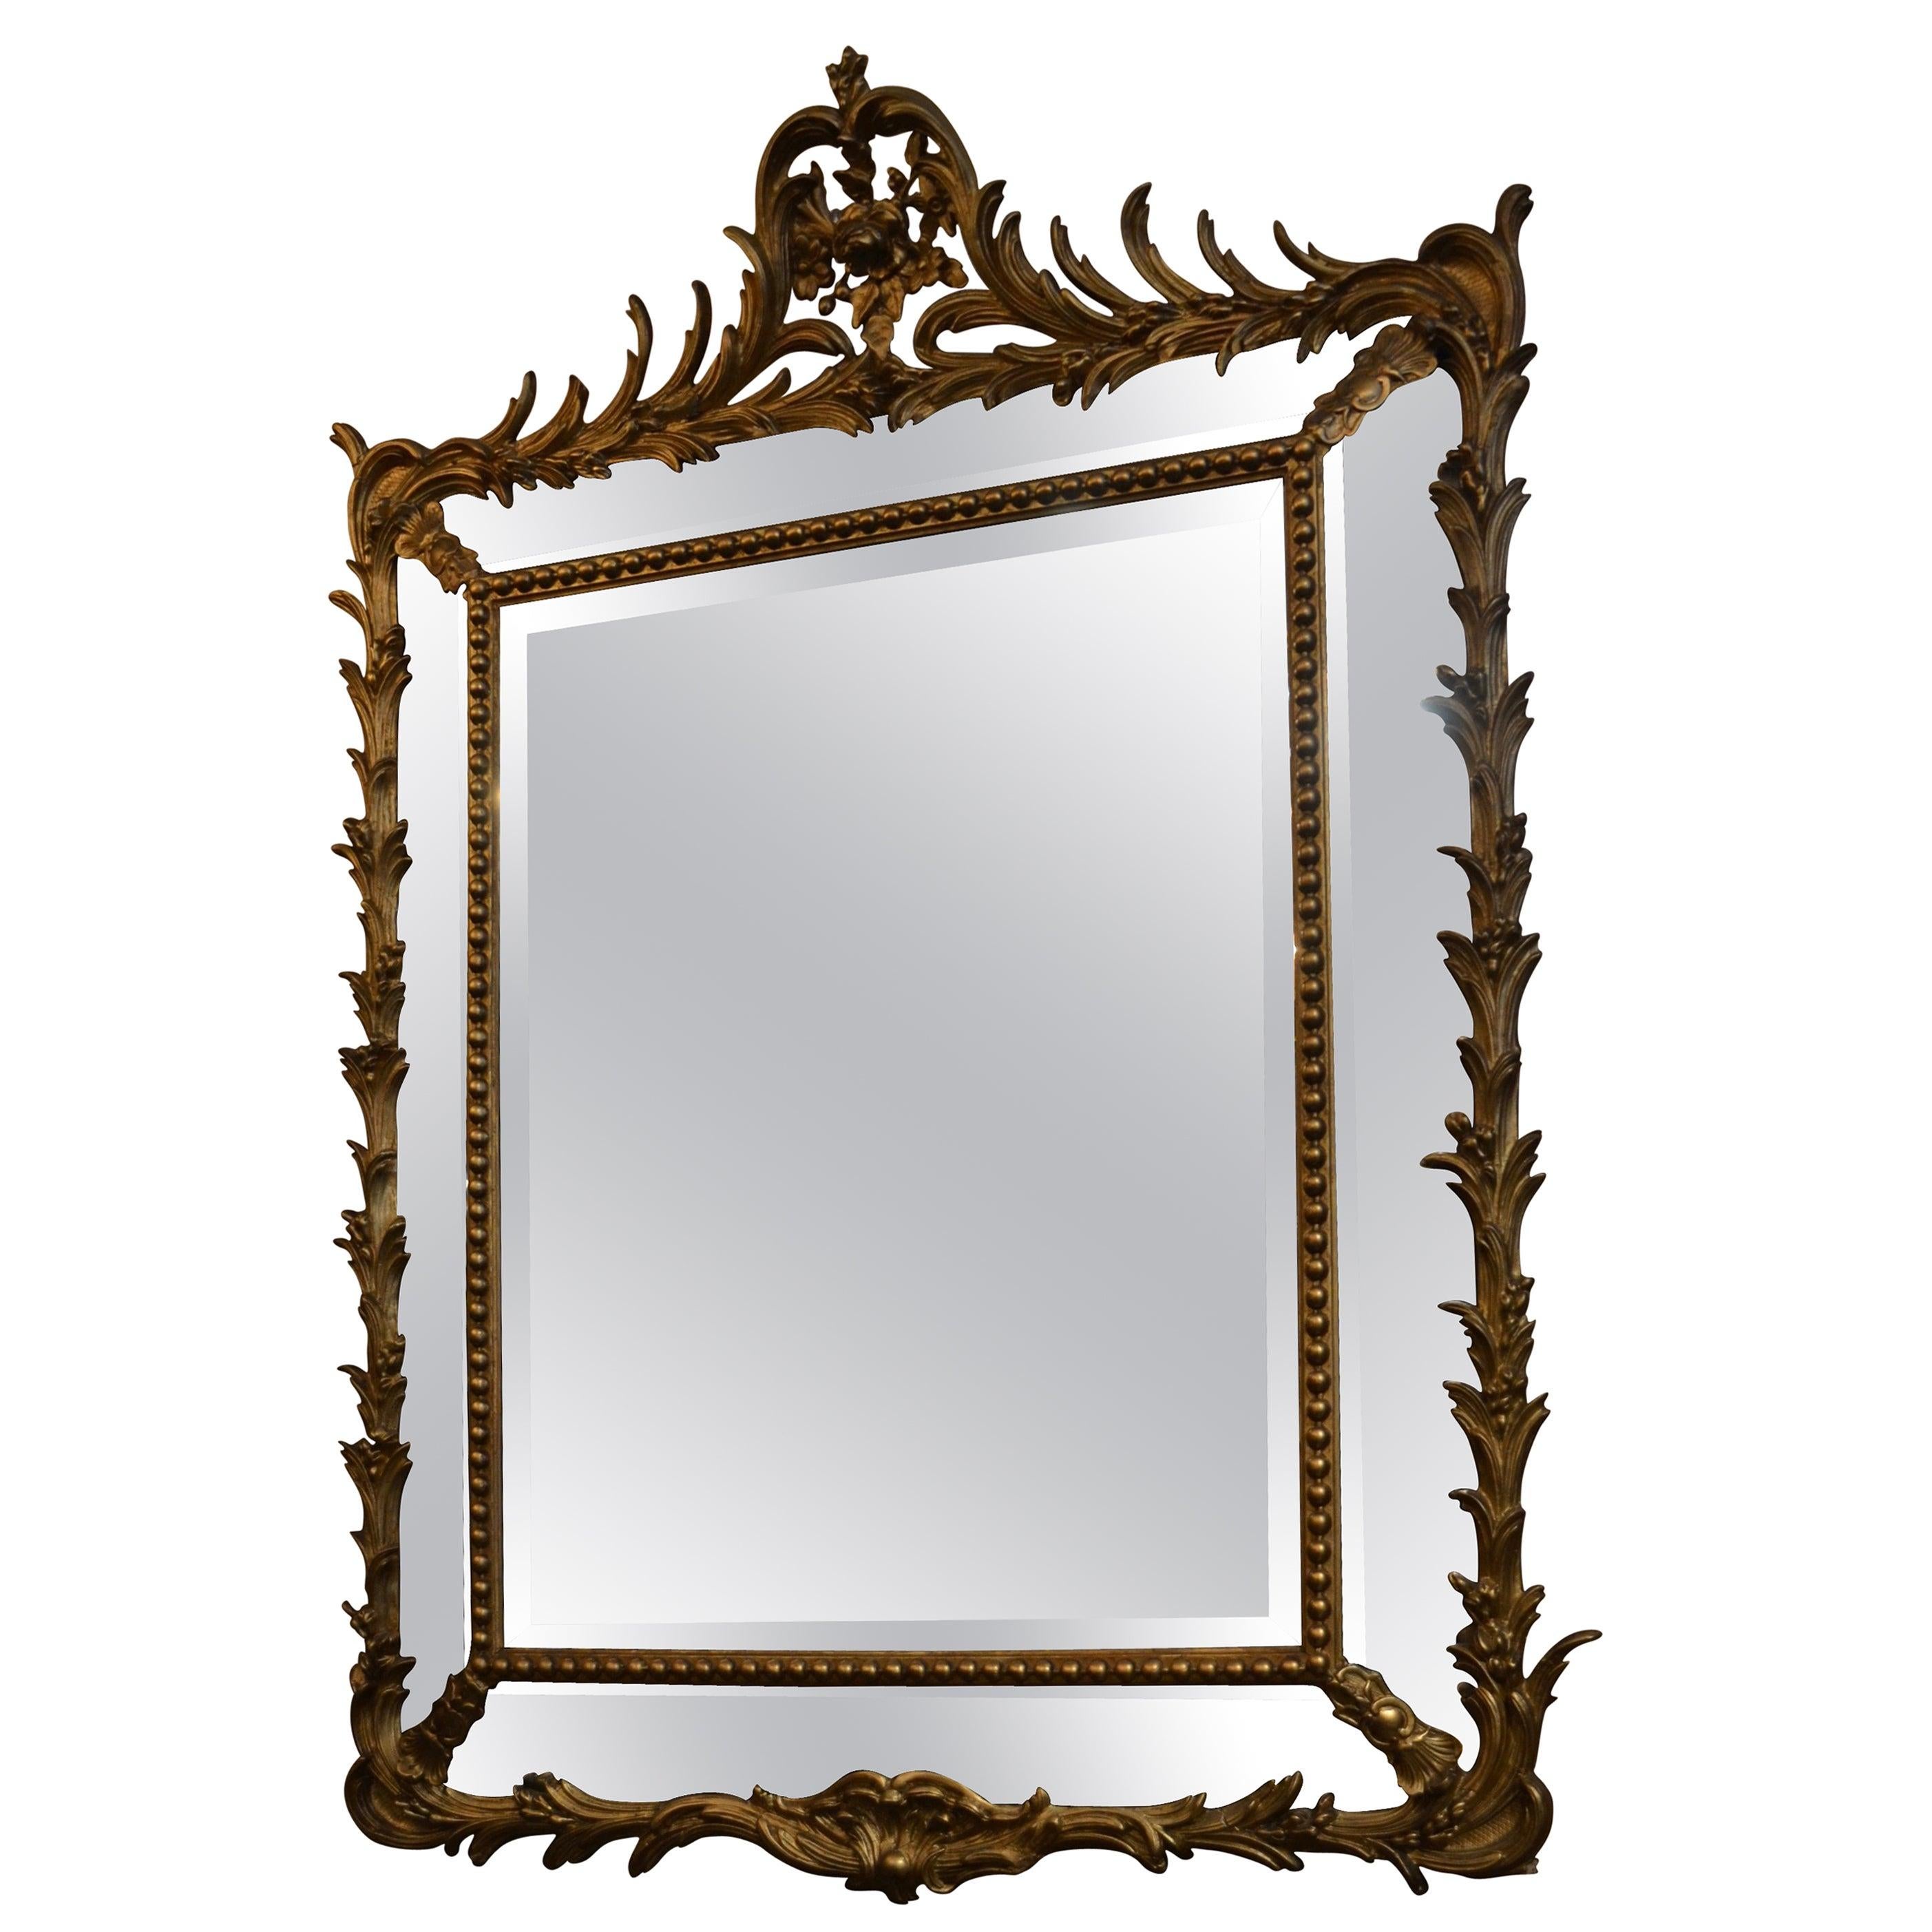 Antique 19th Century French Gold Wood Double Paneled Beveled Mirror, circa 1890 In Good Condition For Sale In New Orleans, LA